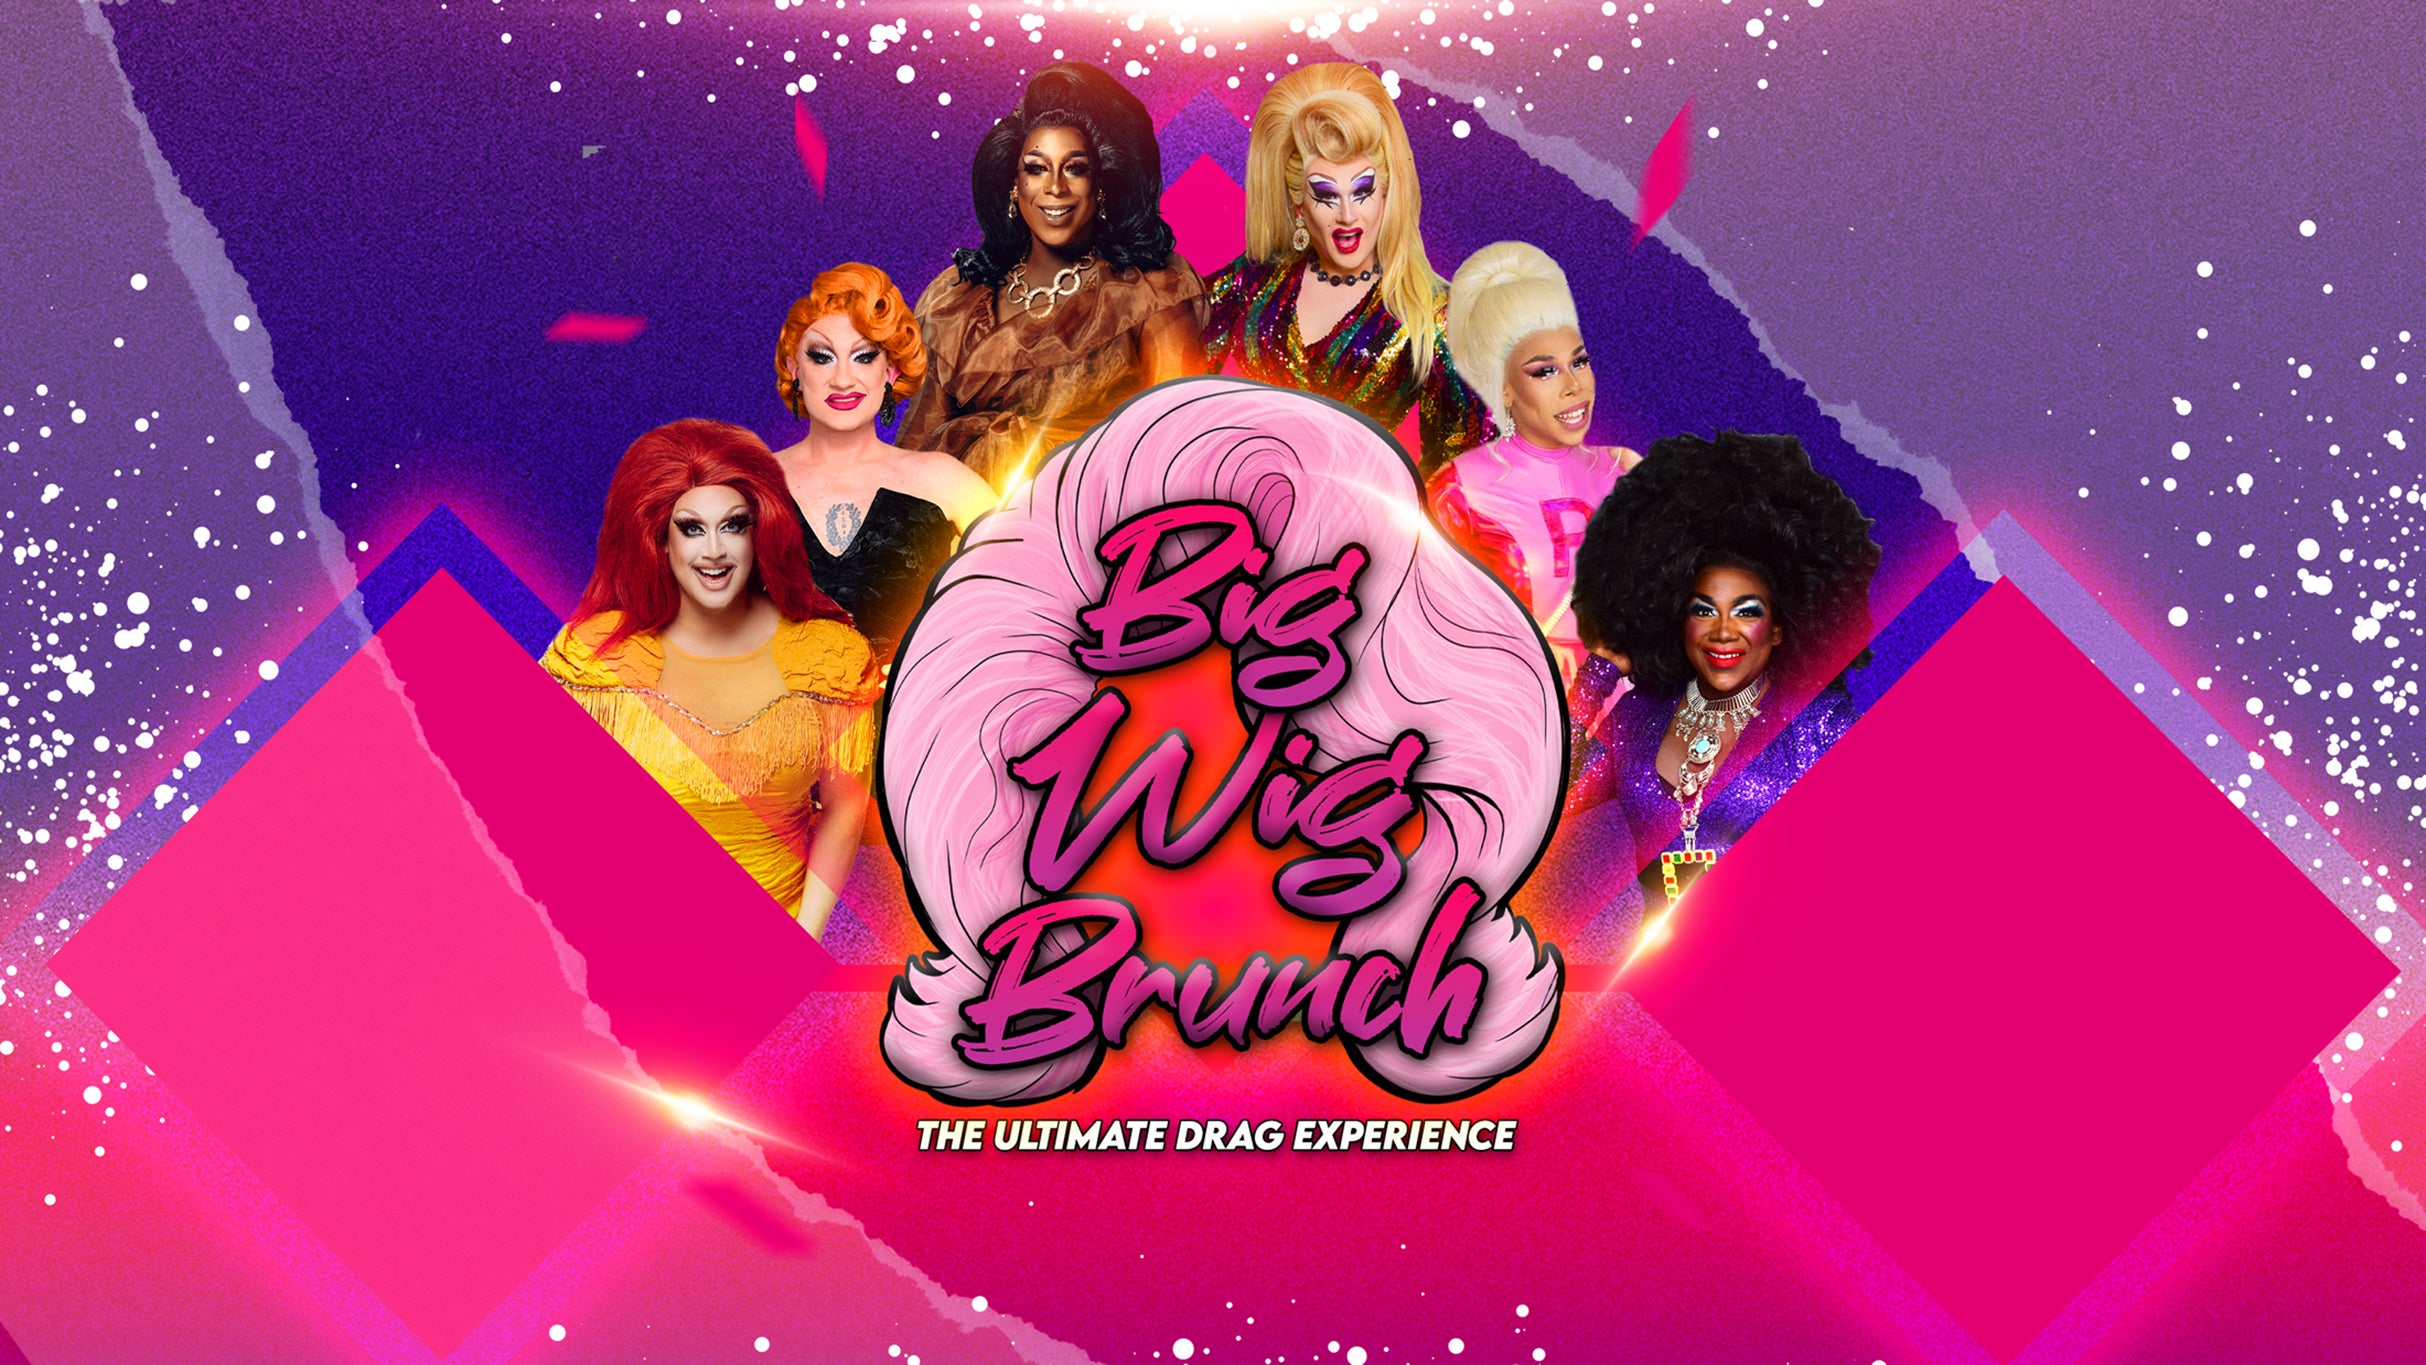 Big Wig Mother's Day Brunch: The Ultimate Drag Experience